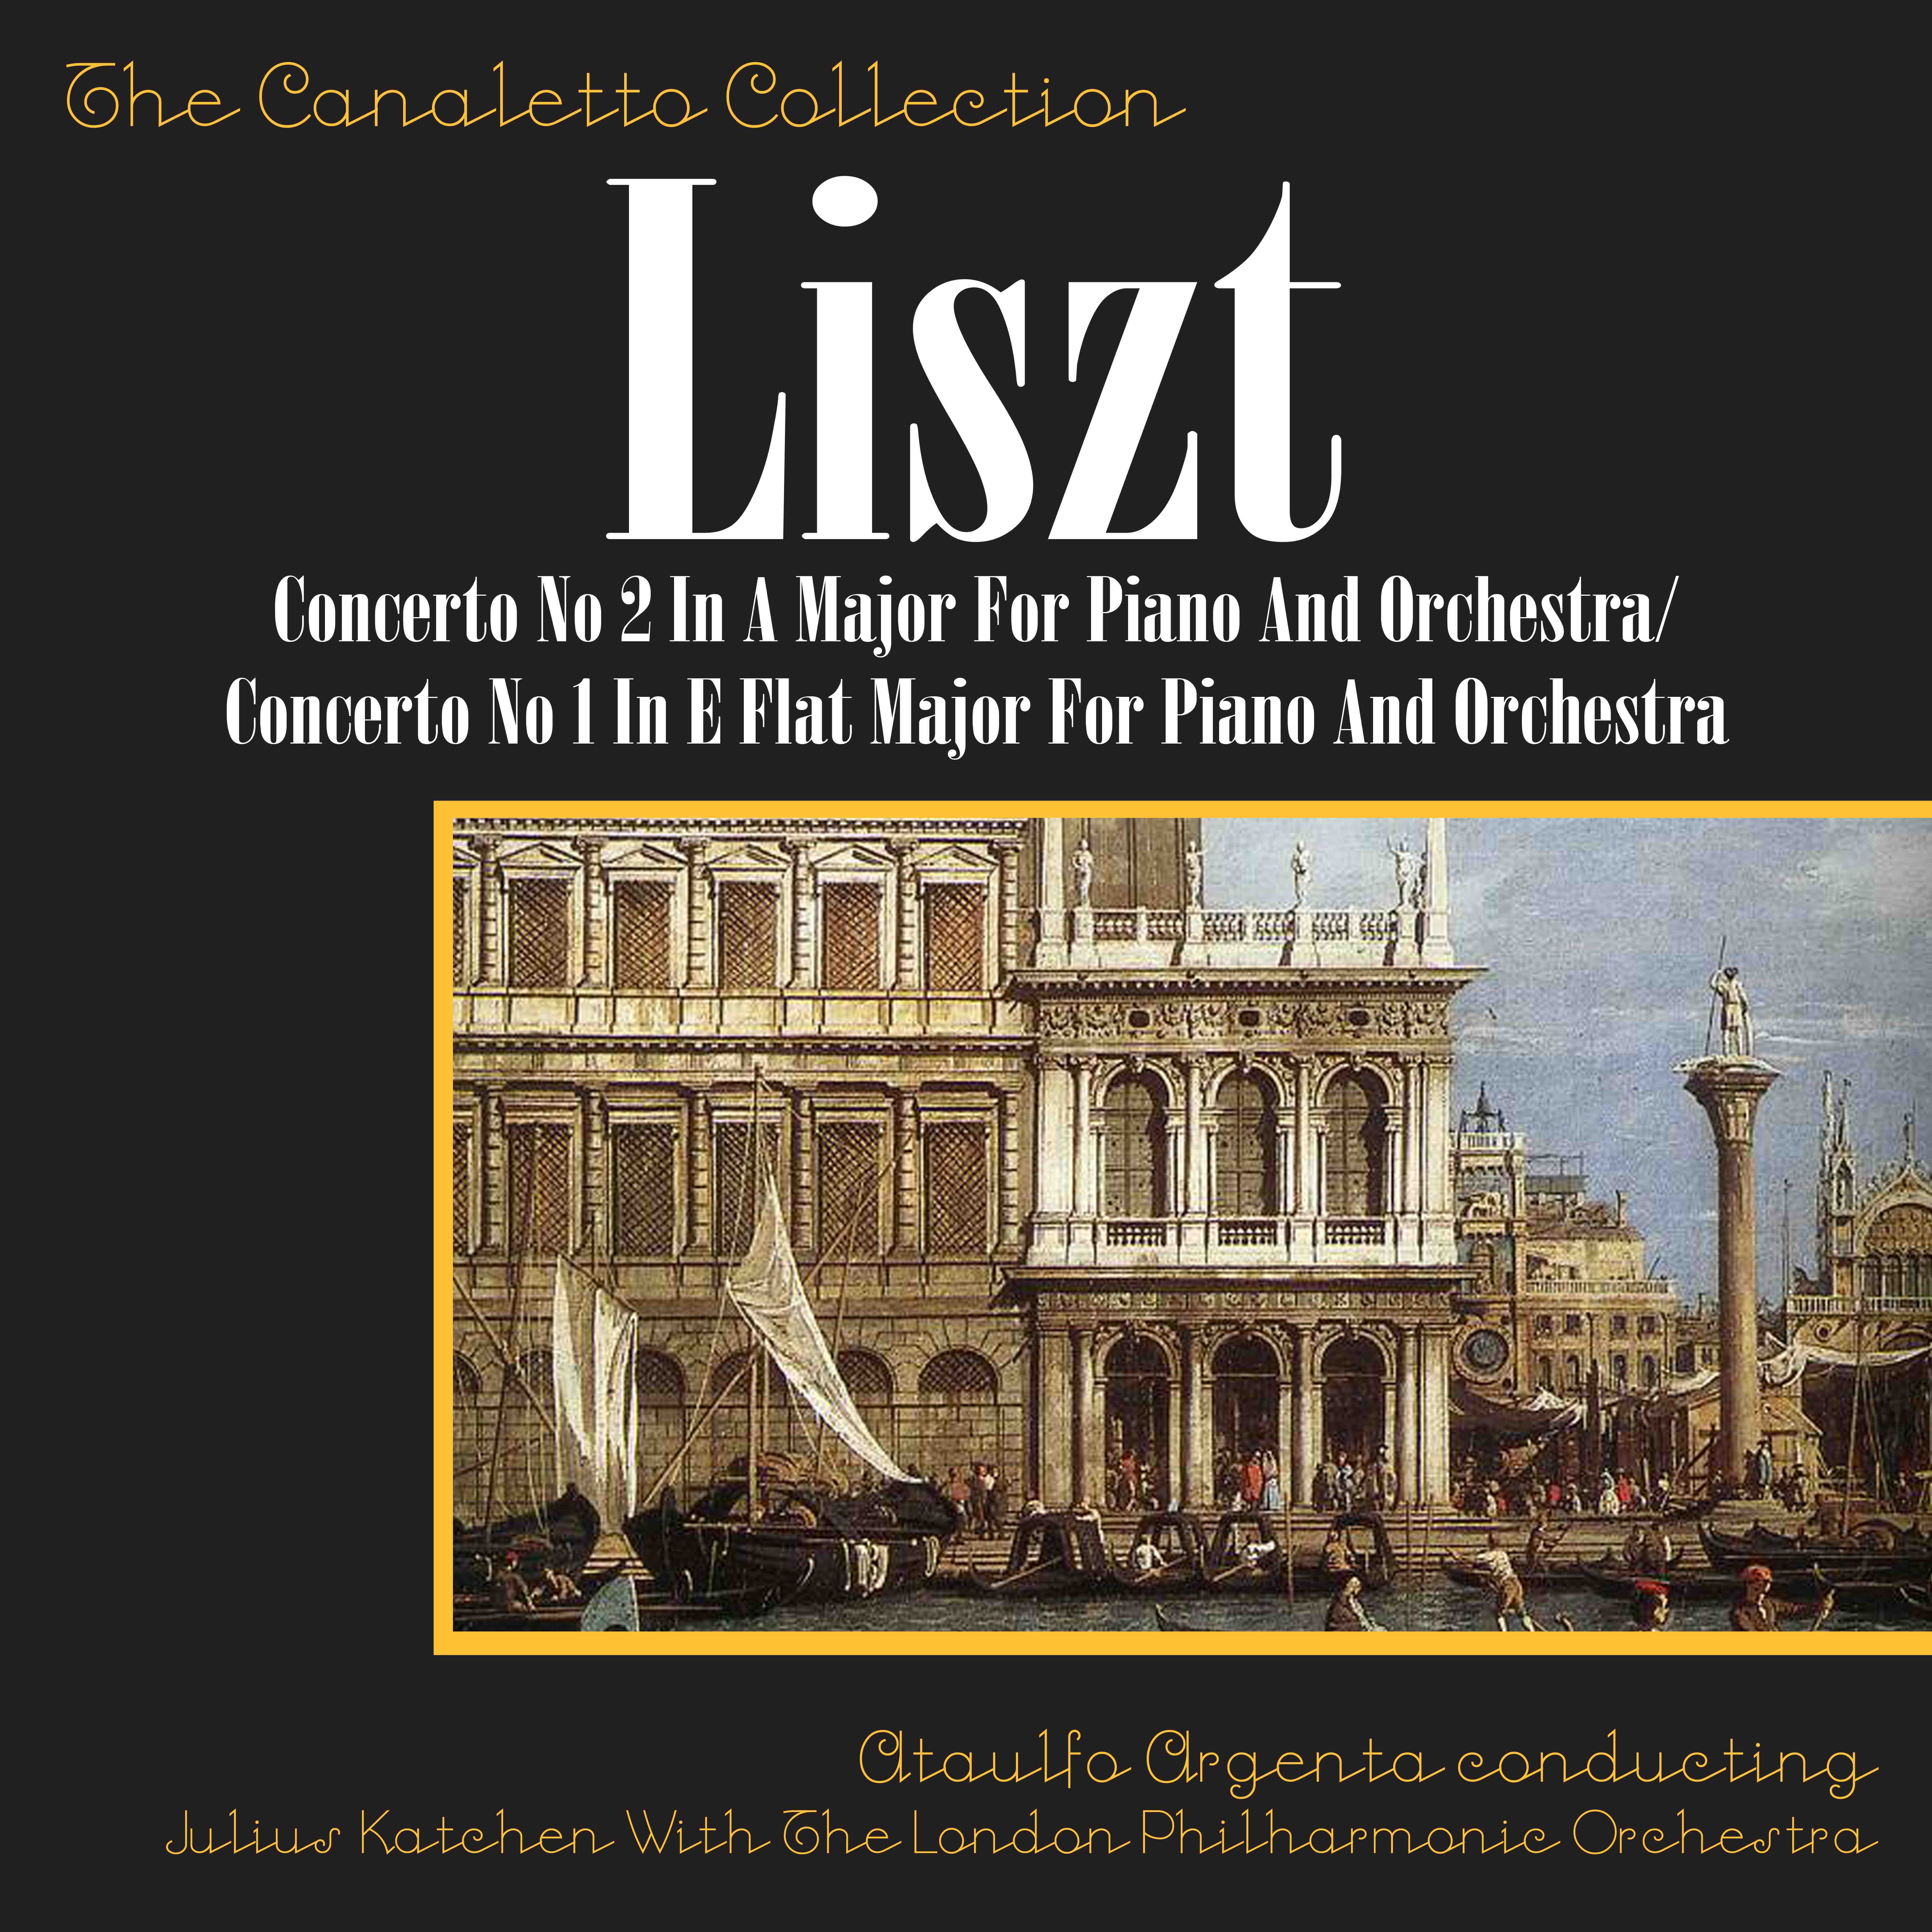 Franz Liszt: Concerto No 2 In A Major For Piano And Orchestra/Concerto No 1 In E Flat Major For Piano And Orchestra